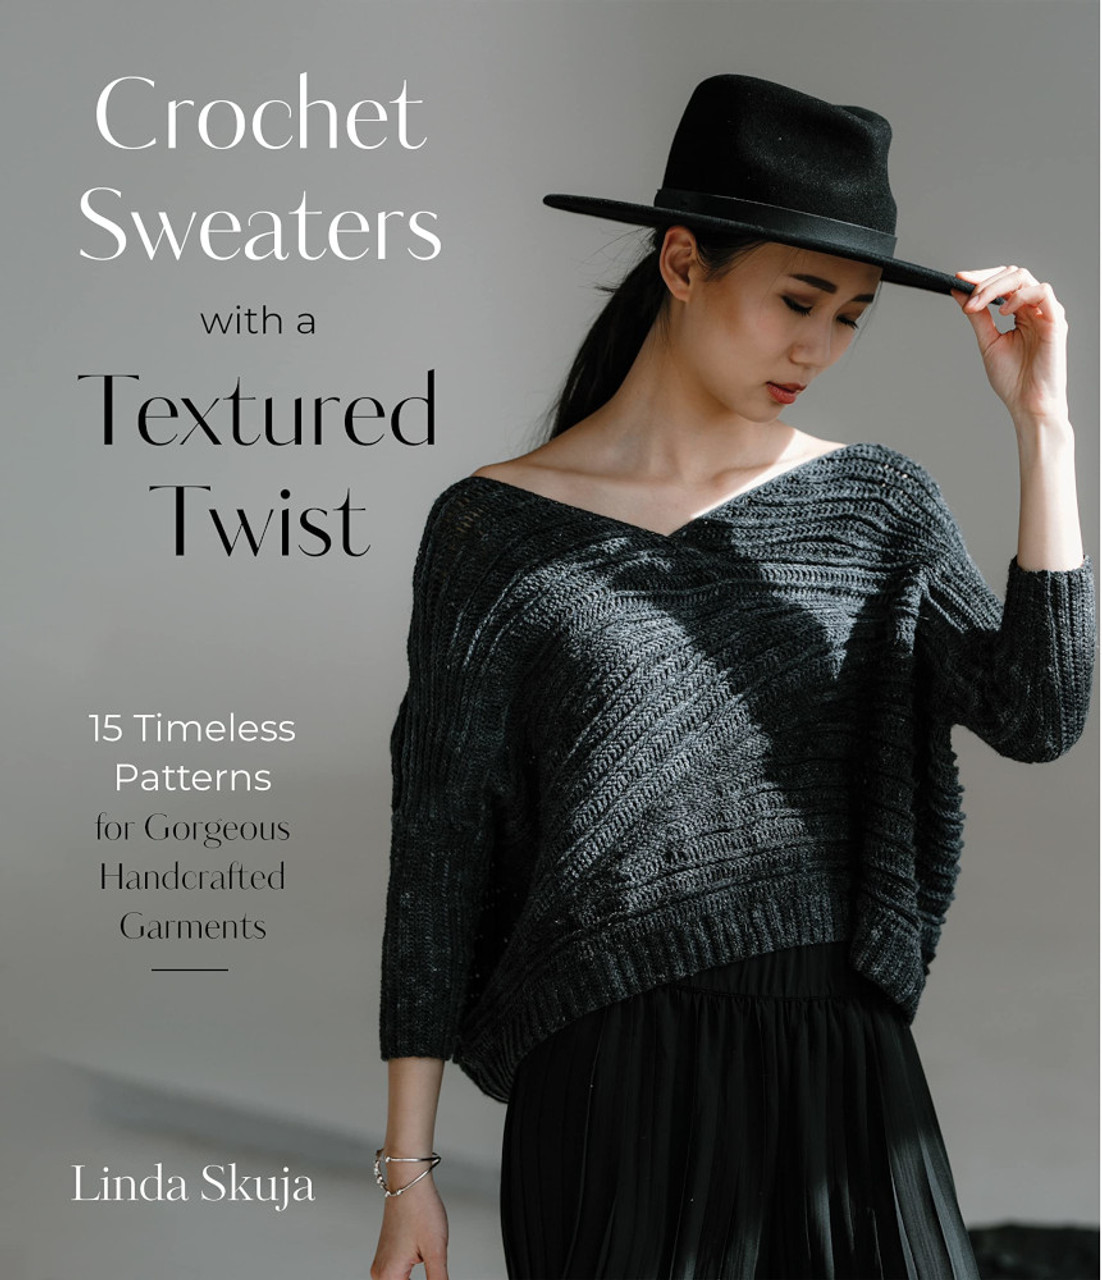 Crochet Sweaters with a Textured Twist - The Websters